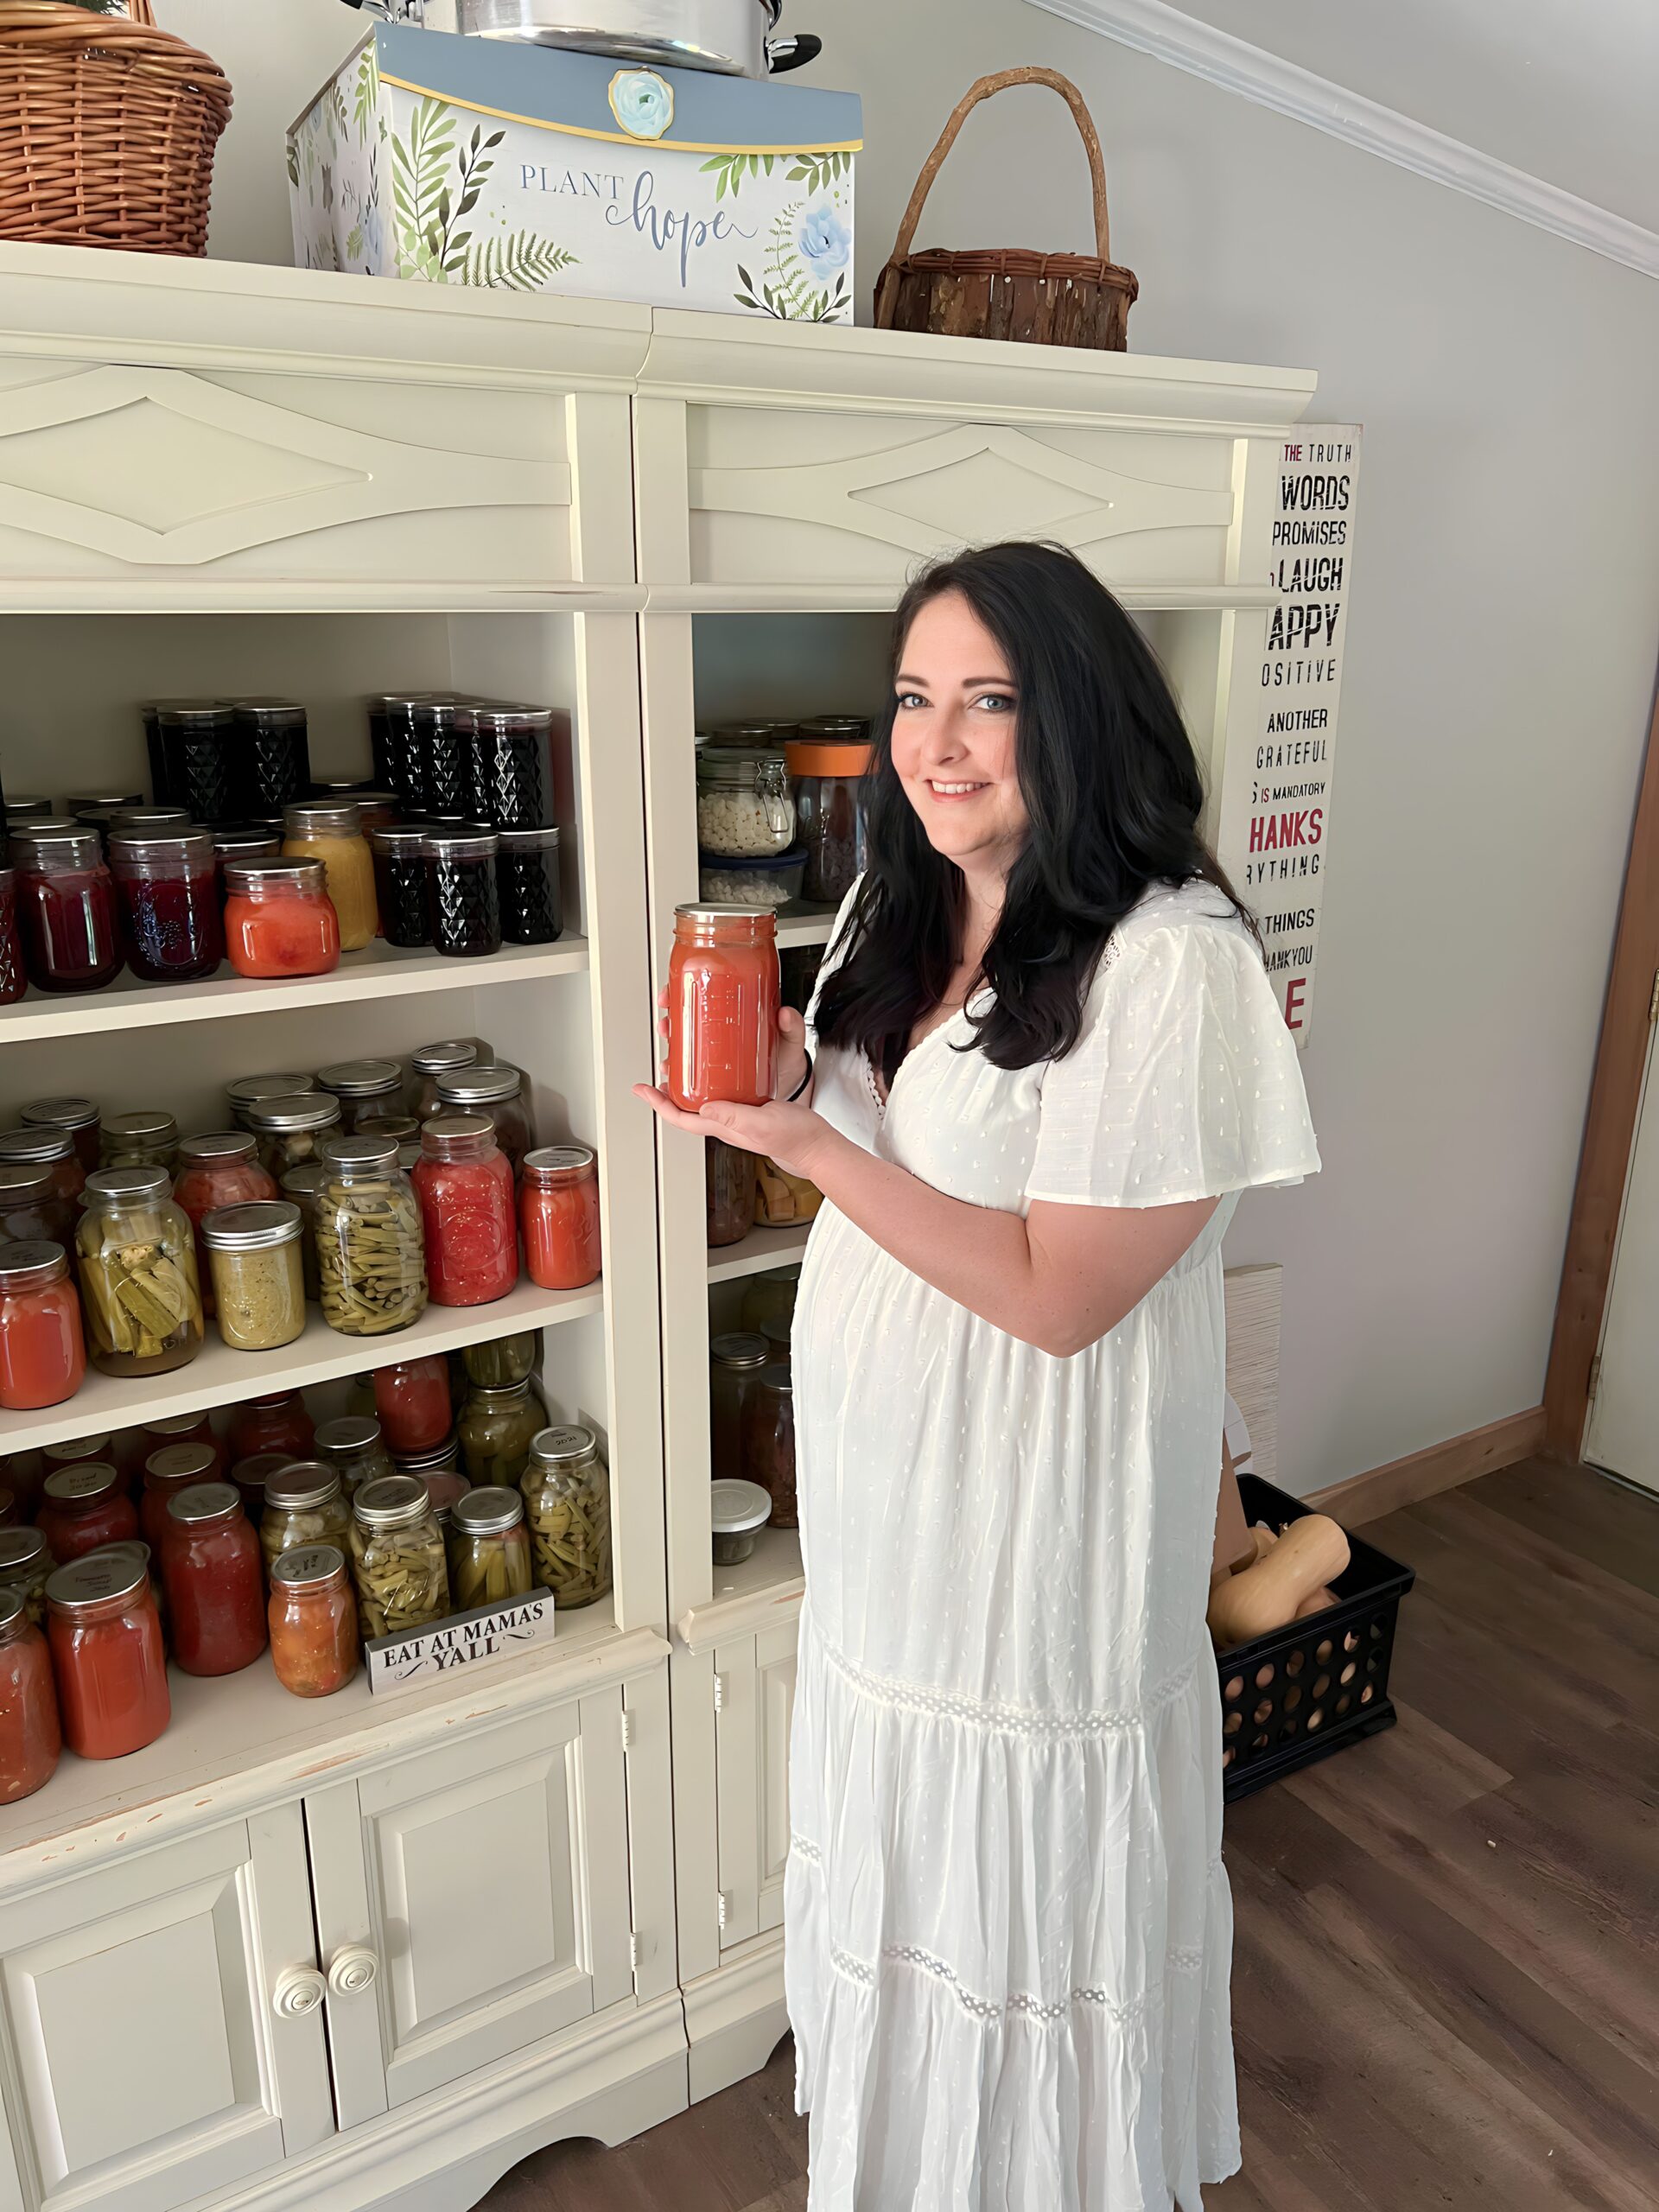 woman showing a home canned jar of tomatoes